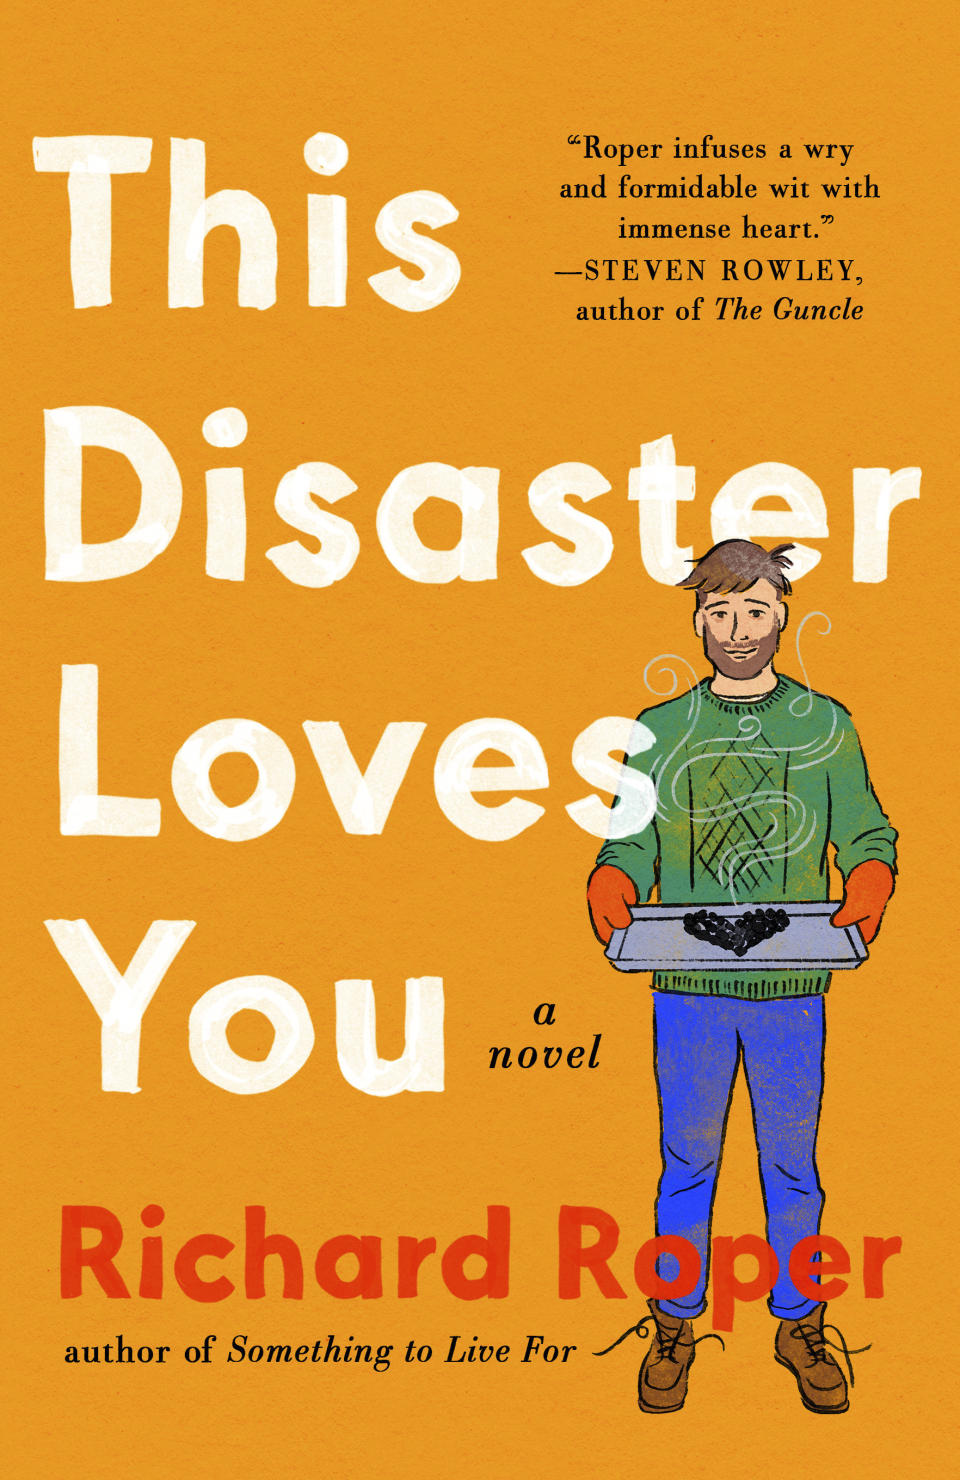 This cover image released by Putnam shows "This Disaster Loves You" by Richard Roper. (Putnam via AP)